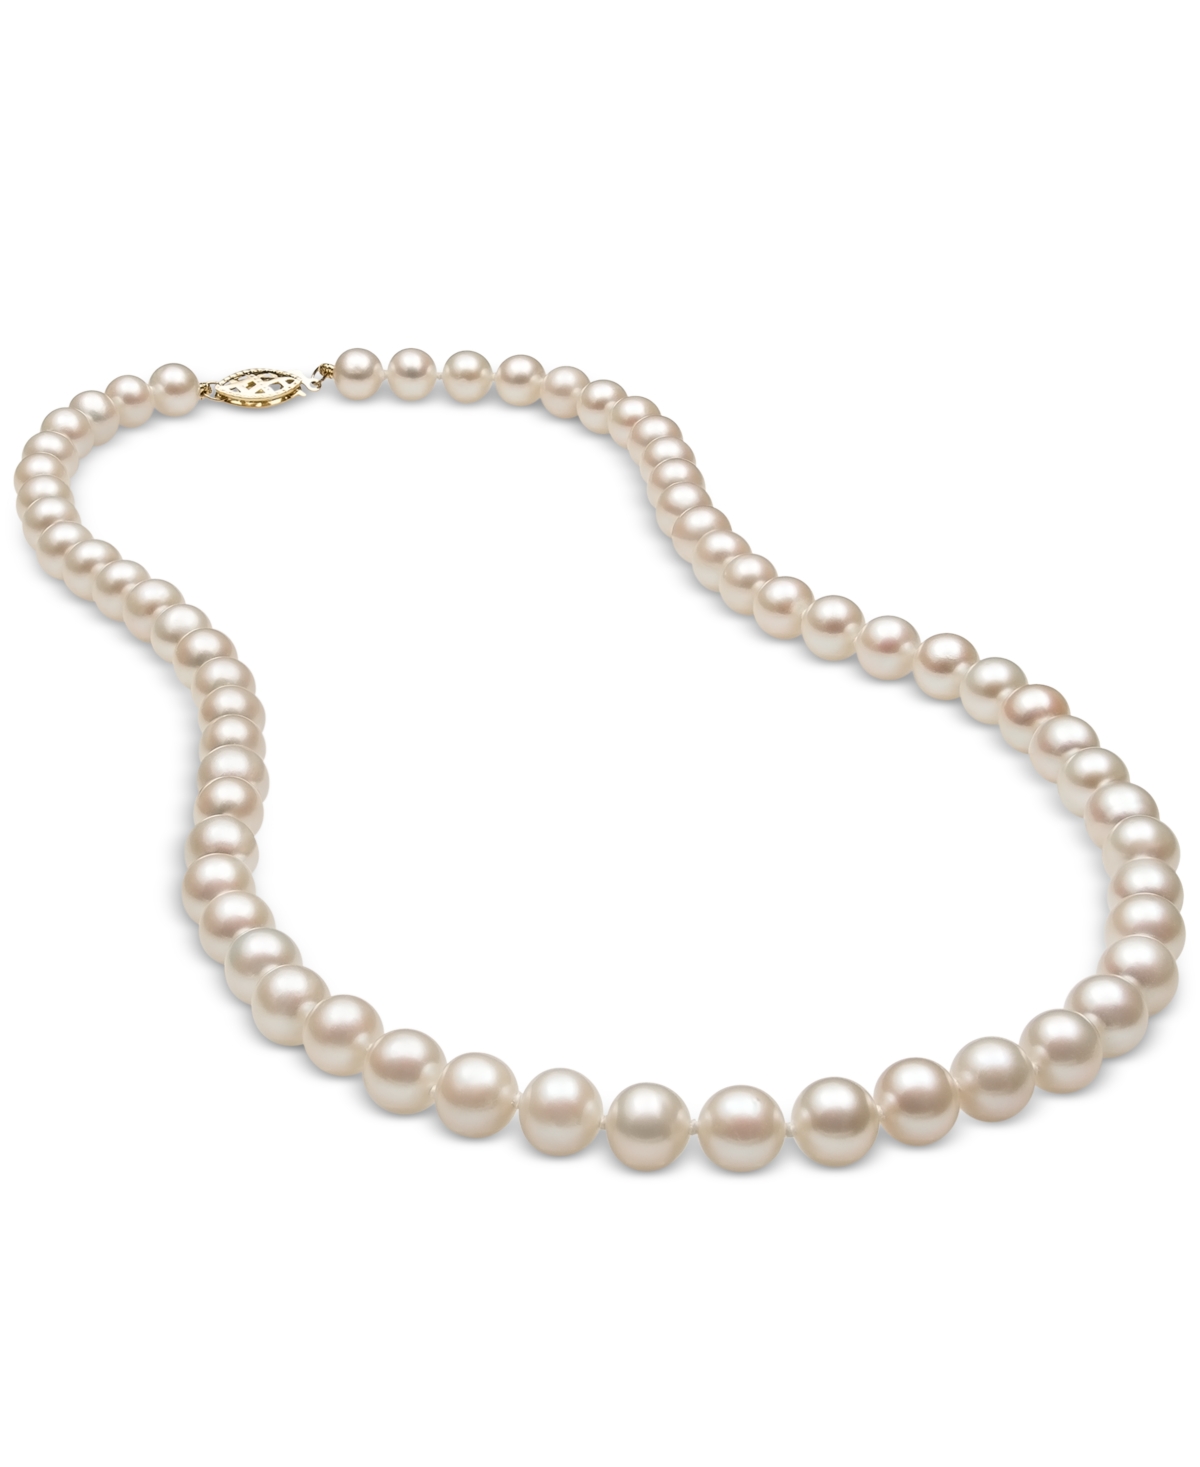 Cultured Freshwater Pearl (6mm) Strand in 14k Gold, 18" - Gold